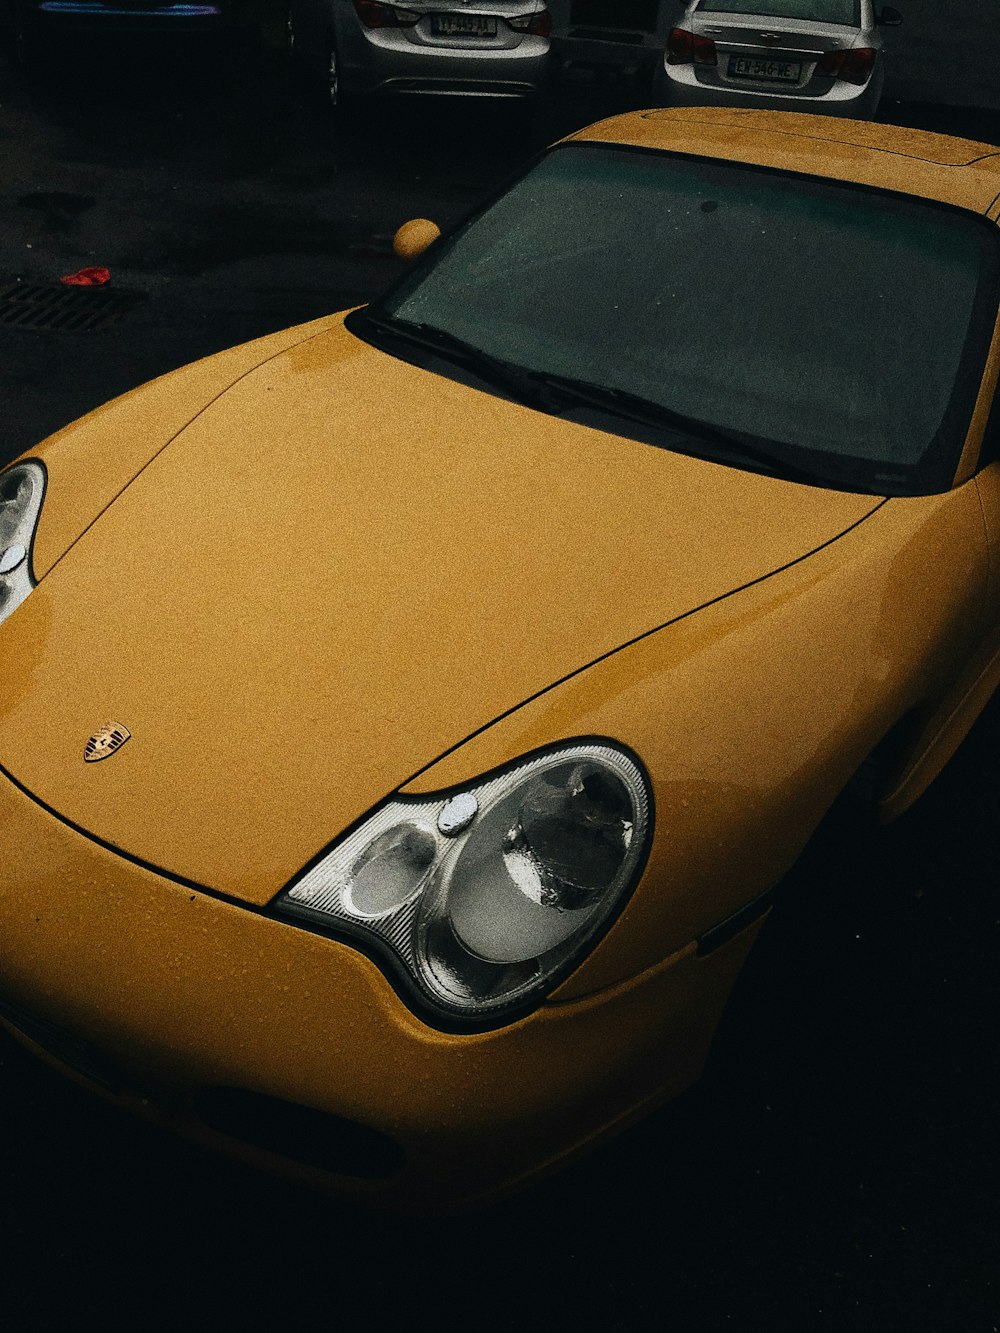 a yellow sports car parked in a parking lot